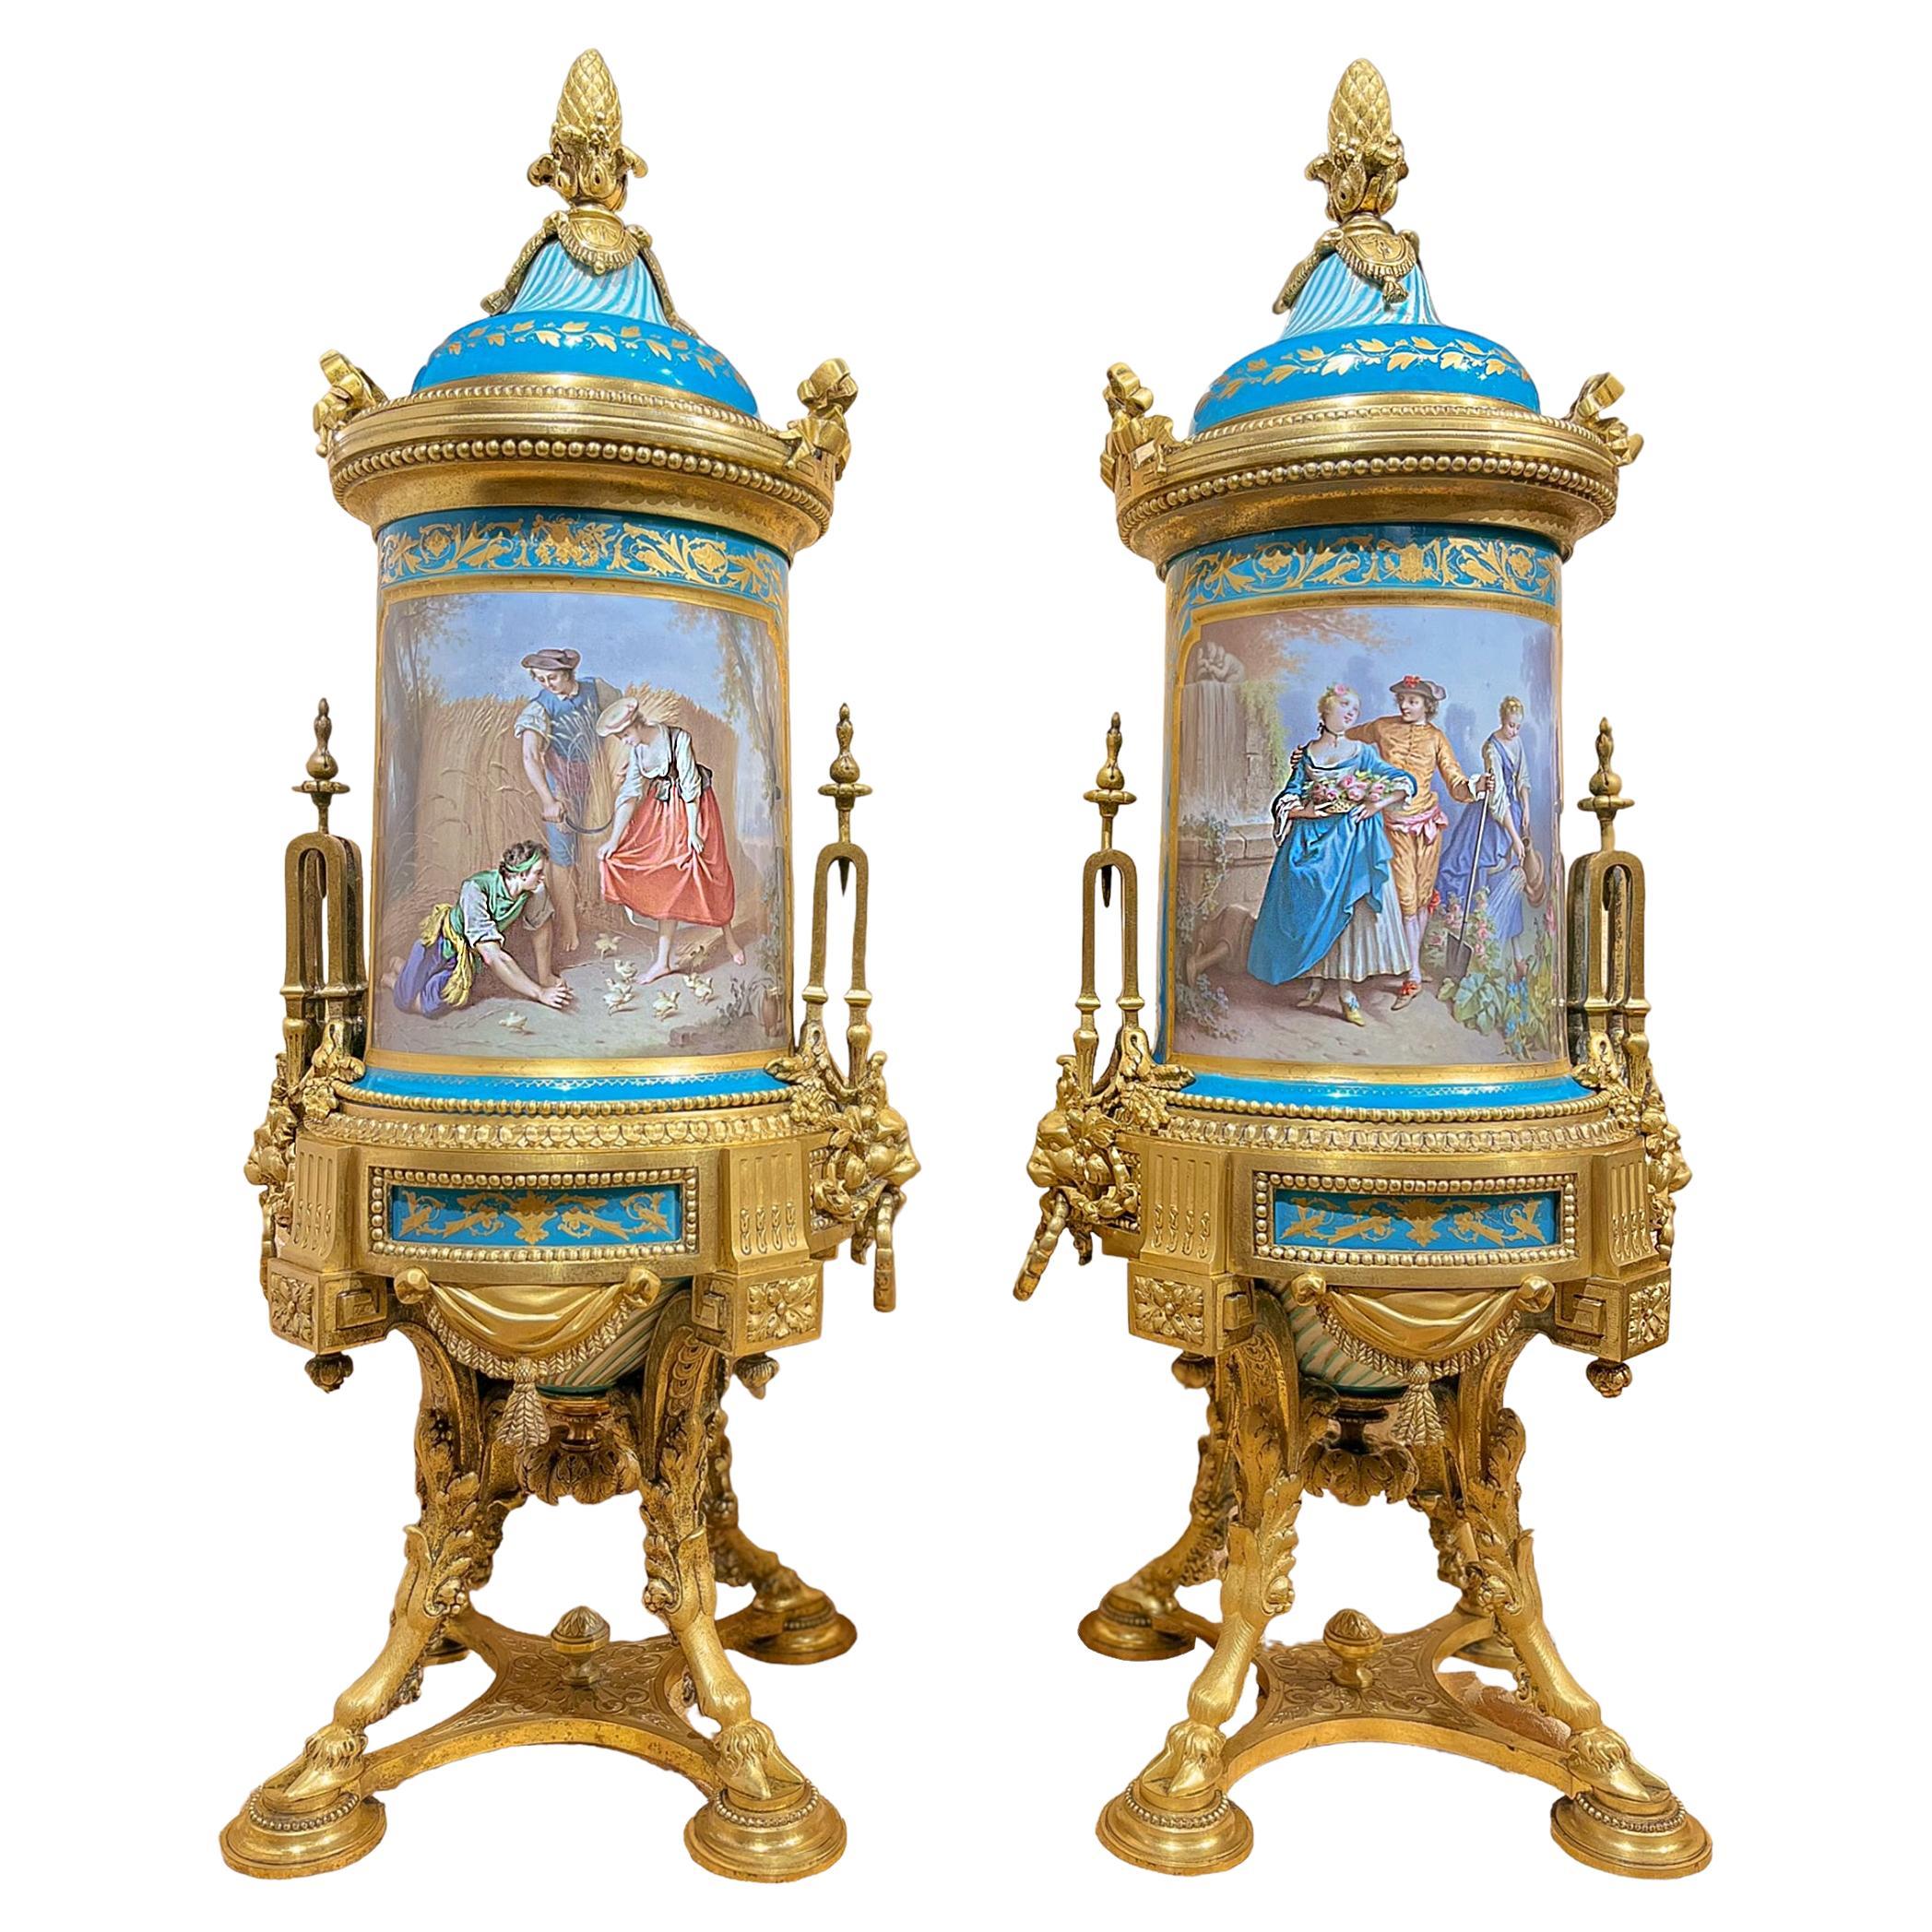 Exceptional and Unusual Pair of Porcelain Cerulean and Ormolu Urns For Sale